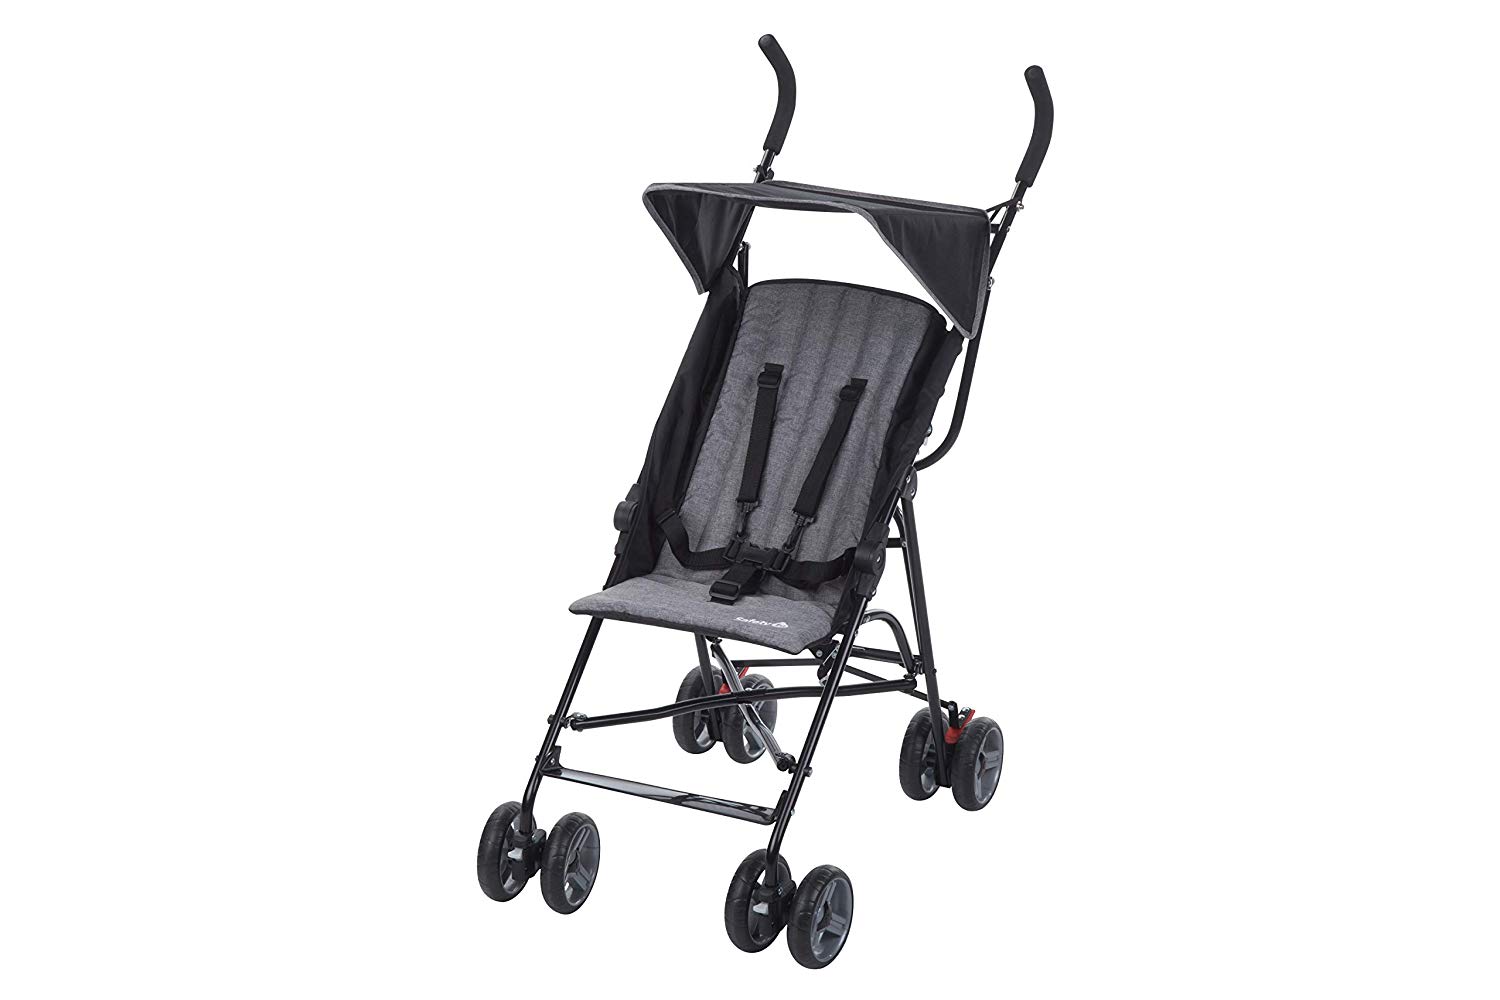 Safety 1st Buggy Flap Lightweight Pushchair with Sun Canopy, Relax Position and Extra Padding (from 6 Months to 15 kg), Black Chic (Black)